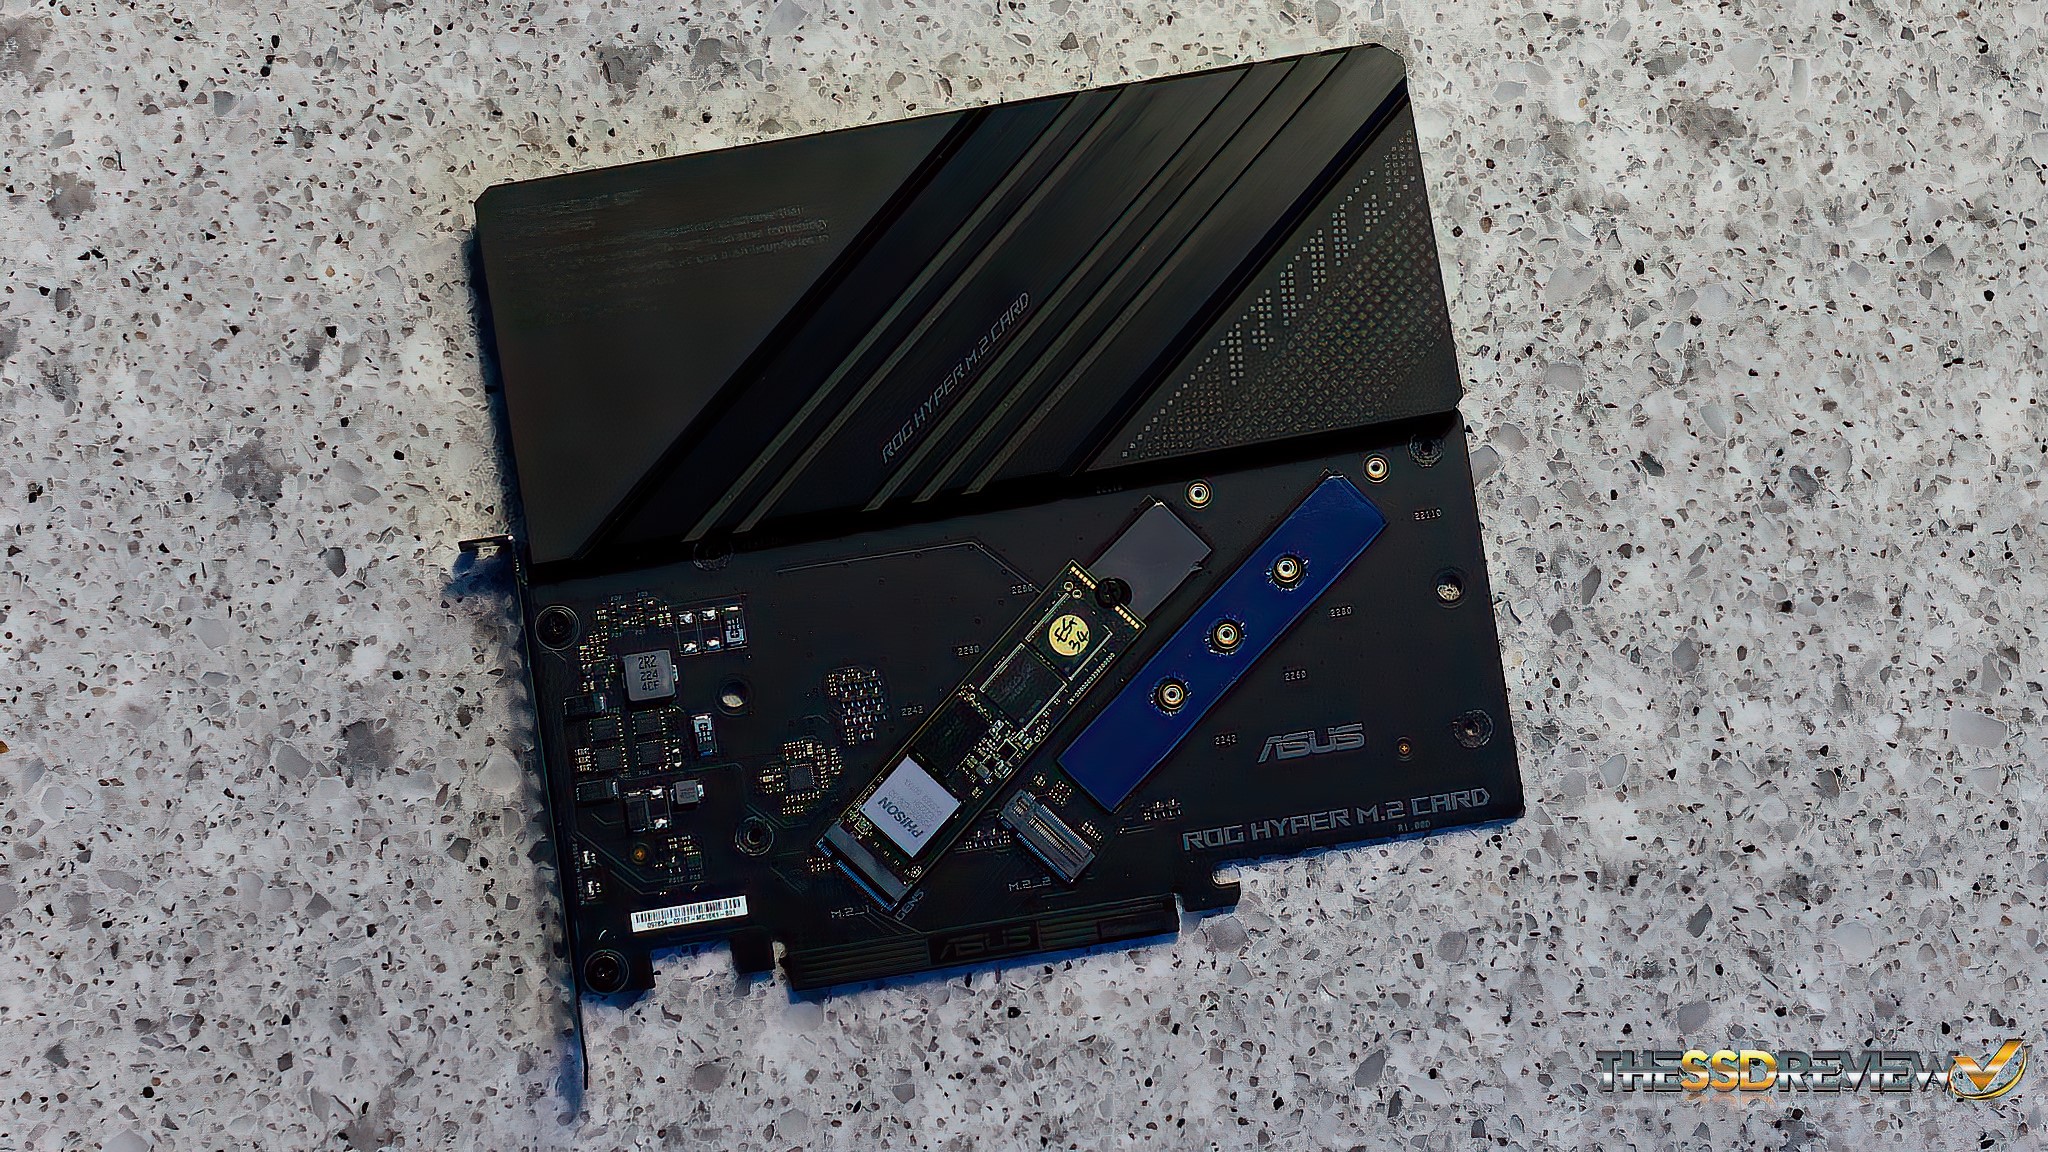 overflade af Sælger Phison PS5026-E26 Reference Design PCIe 5.0 2TB NVMe M.2 SSD Preview -  Things Just Got a Whole Lot Faster | The SSD Review